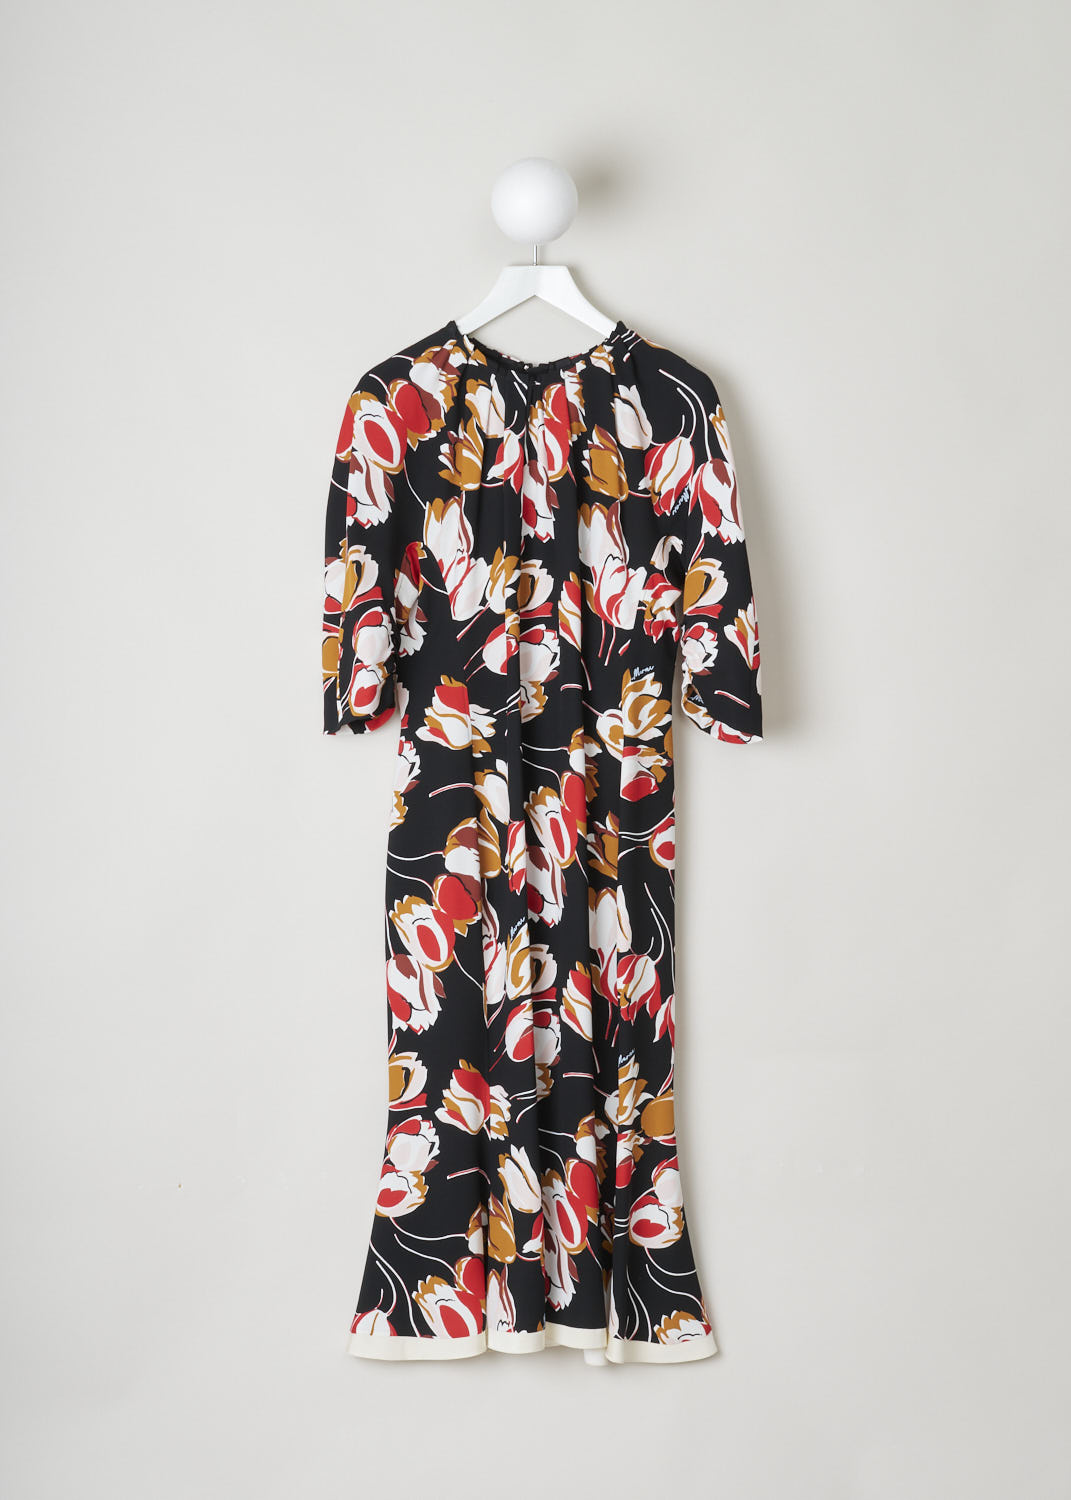 MARNI, BLACK MAXI DRESS WITH RED FLORAL PRINT, ABMA0739Q0_UTV844_WIN99, Black, Print, Front, This black maxi dress has a floral print in shades of reds and browns. The dress has a round, box pleated neckline. Those same pleats can be found on the three-quarter sleeves. In the back, a concealed centre zip functions as the closing option. The dress has a white satin hemline. 
